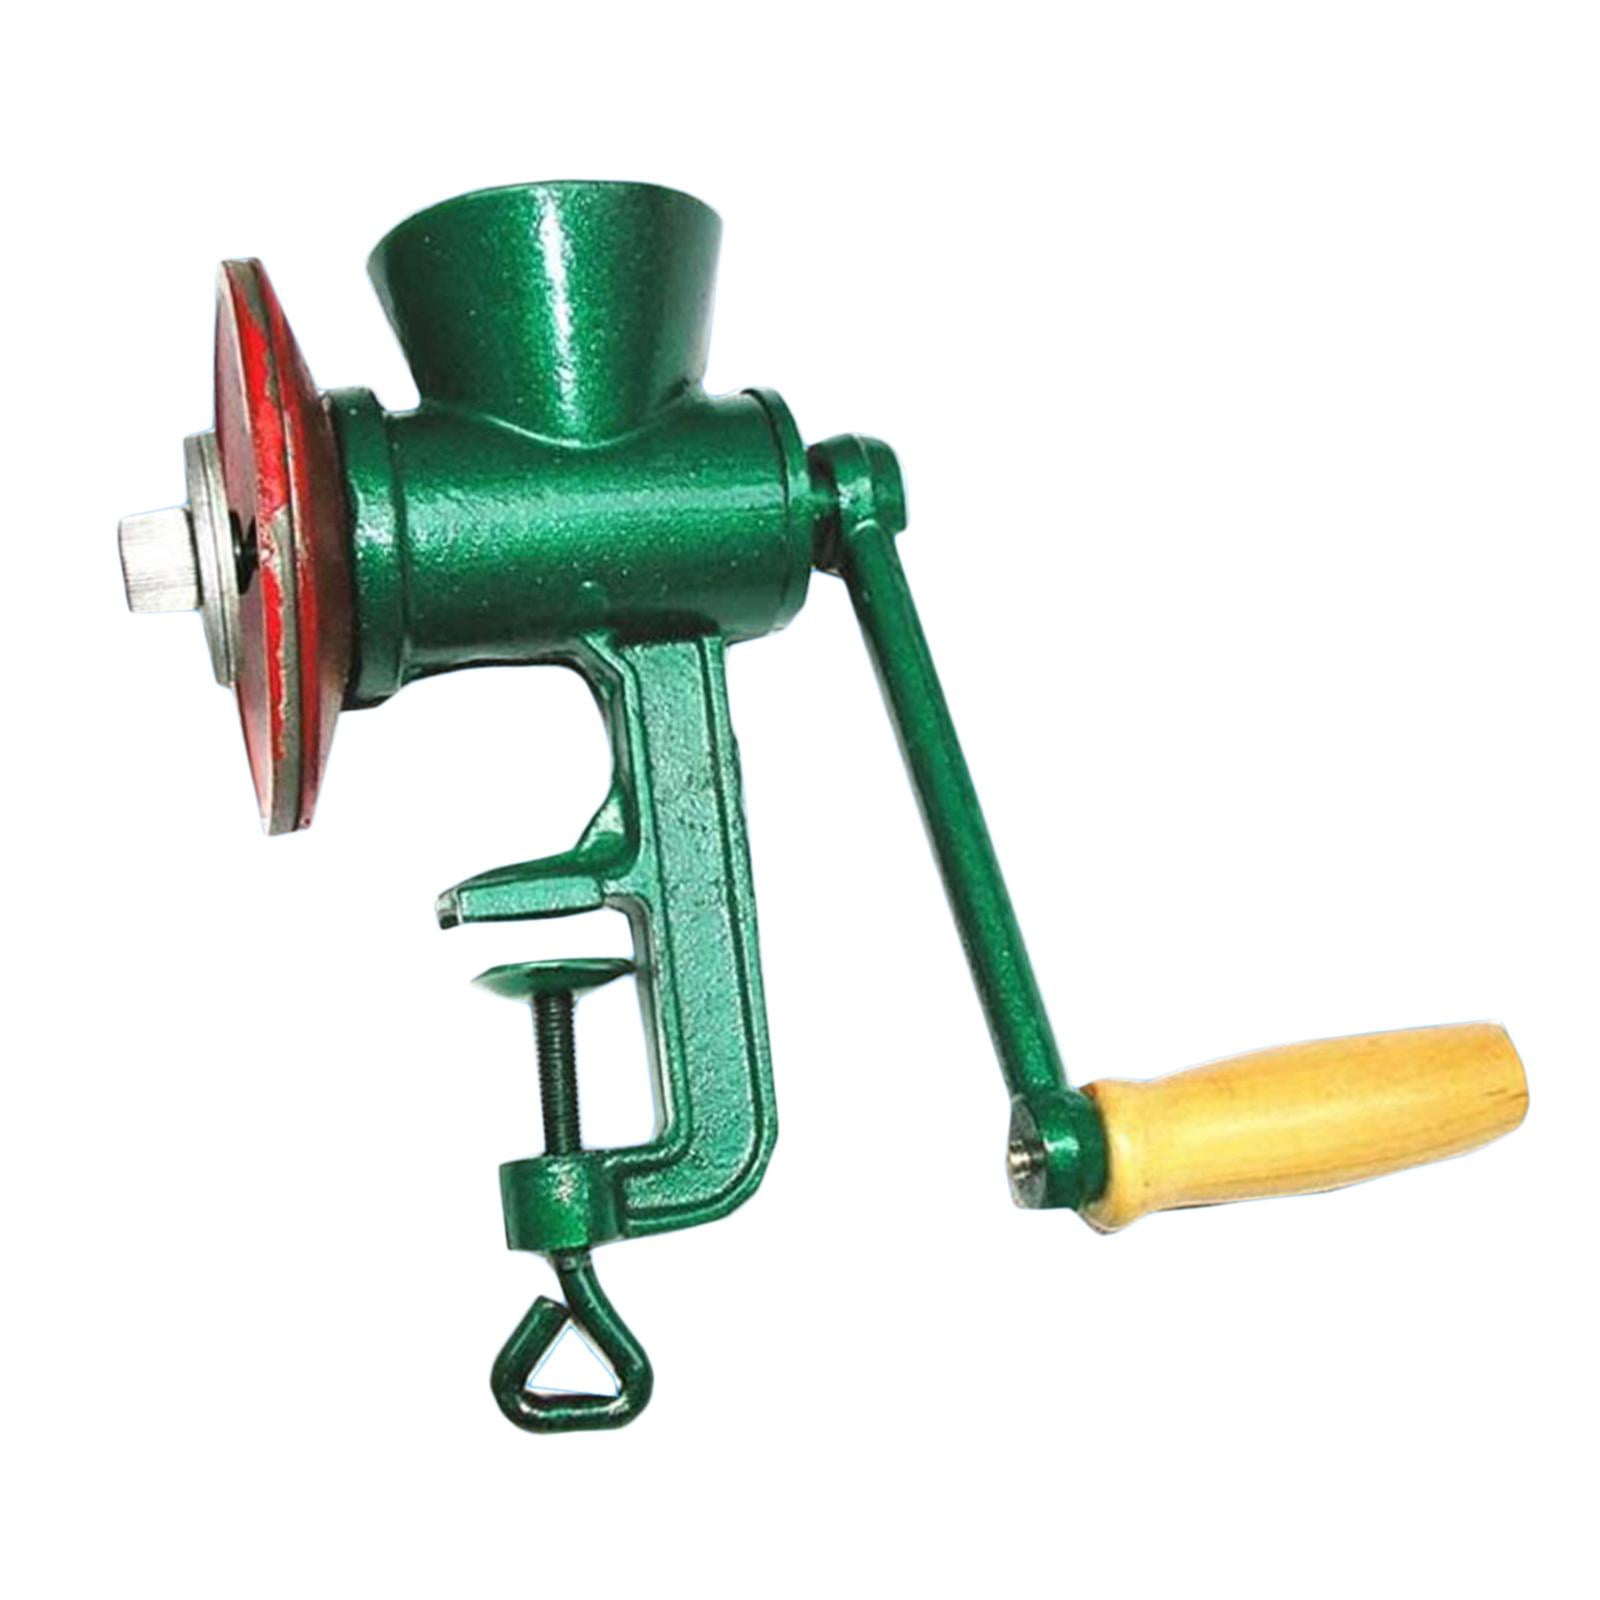 Details about   Manual Grain Grinders Tall Cast Iron Hand Crank Mill for Wheat Coffee Oats 